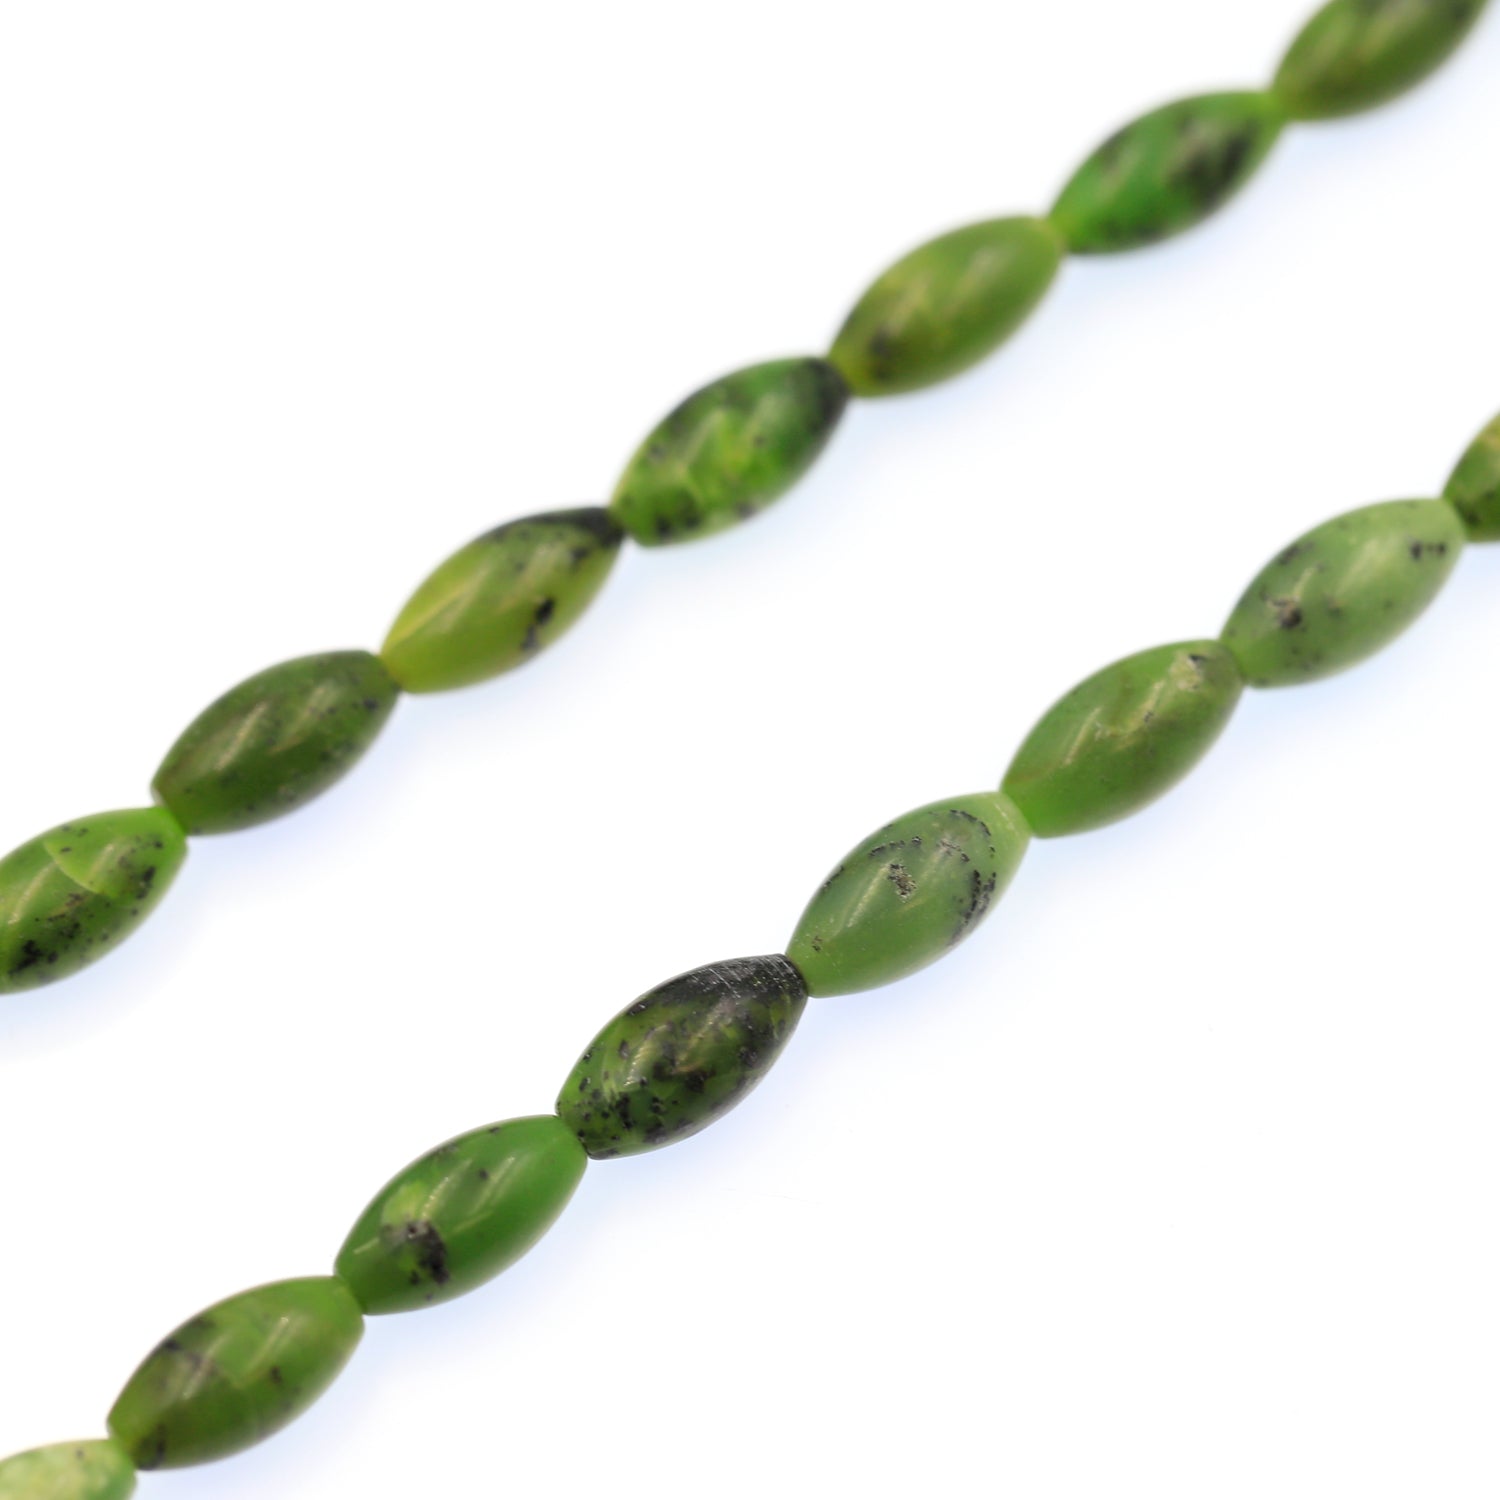 Serpentine New Jade Multi Color Faceted Rondelle Gemstone Beads (N) 8mm  15.5 inchesPurchase